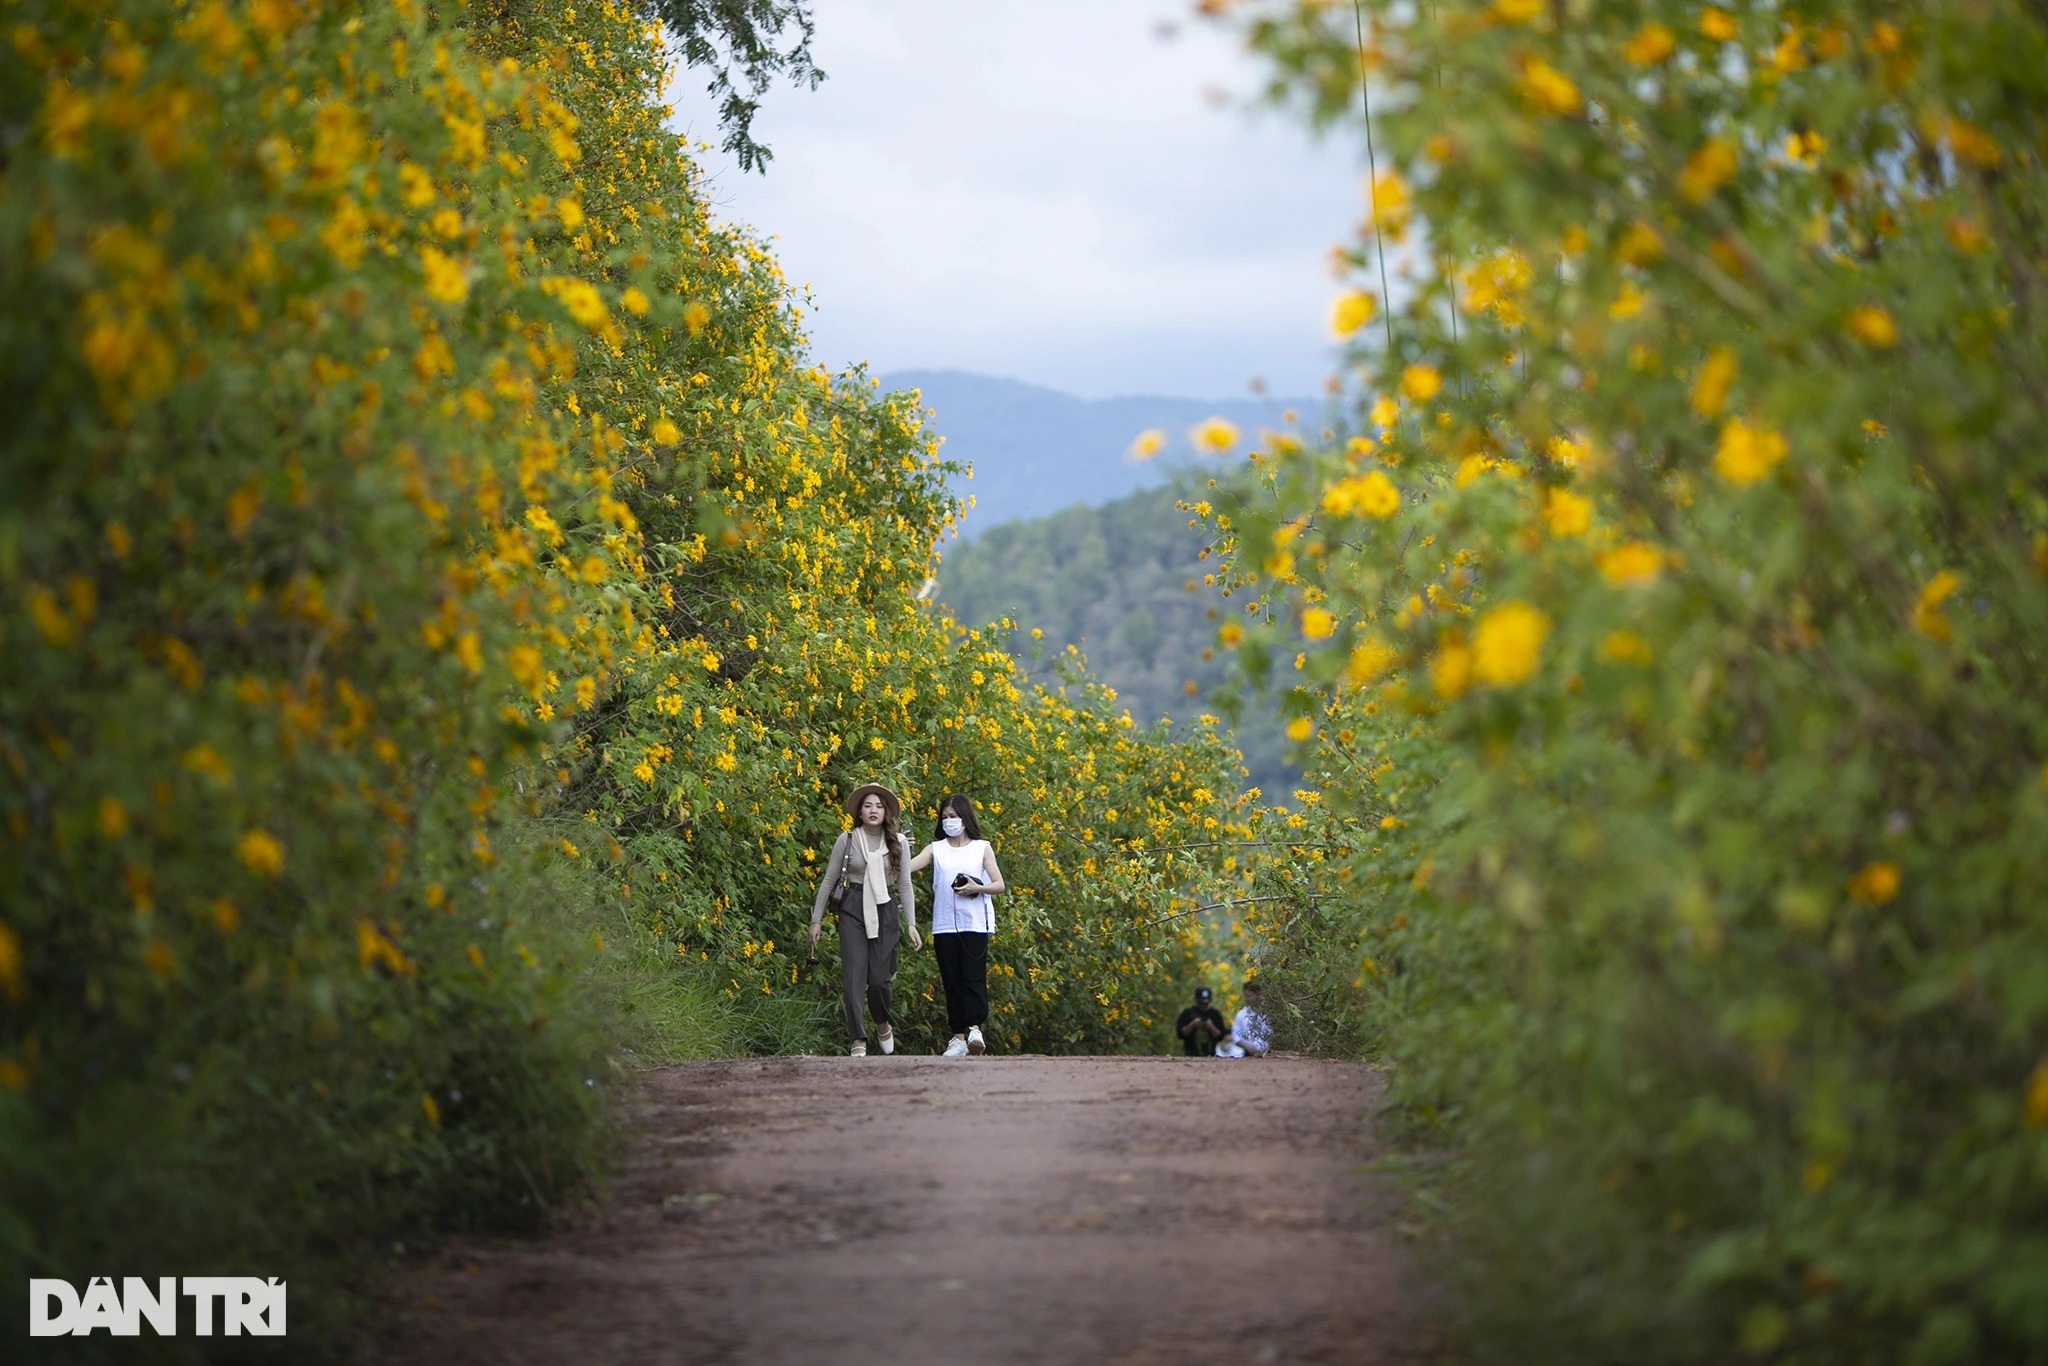 Wild sunflowers bloom on the hillside, young people flock to the outskirts of Da Lat to check-in - 13